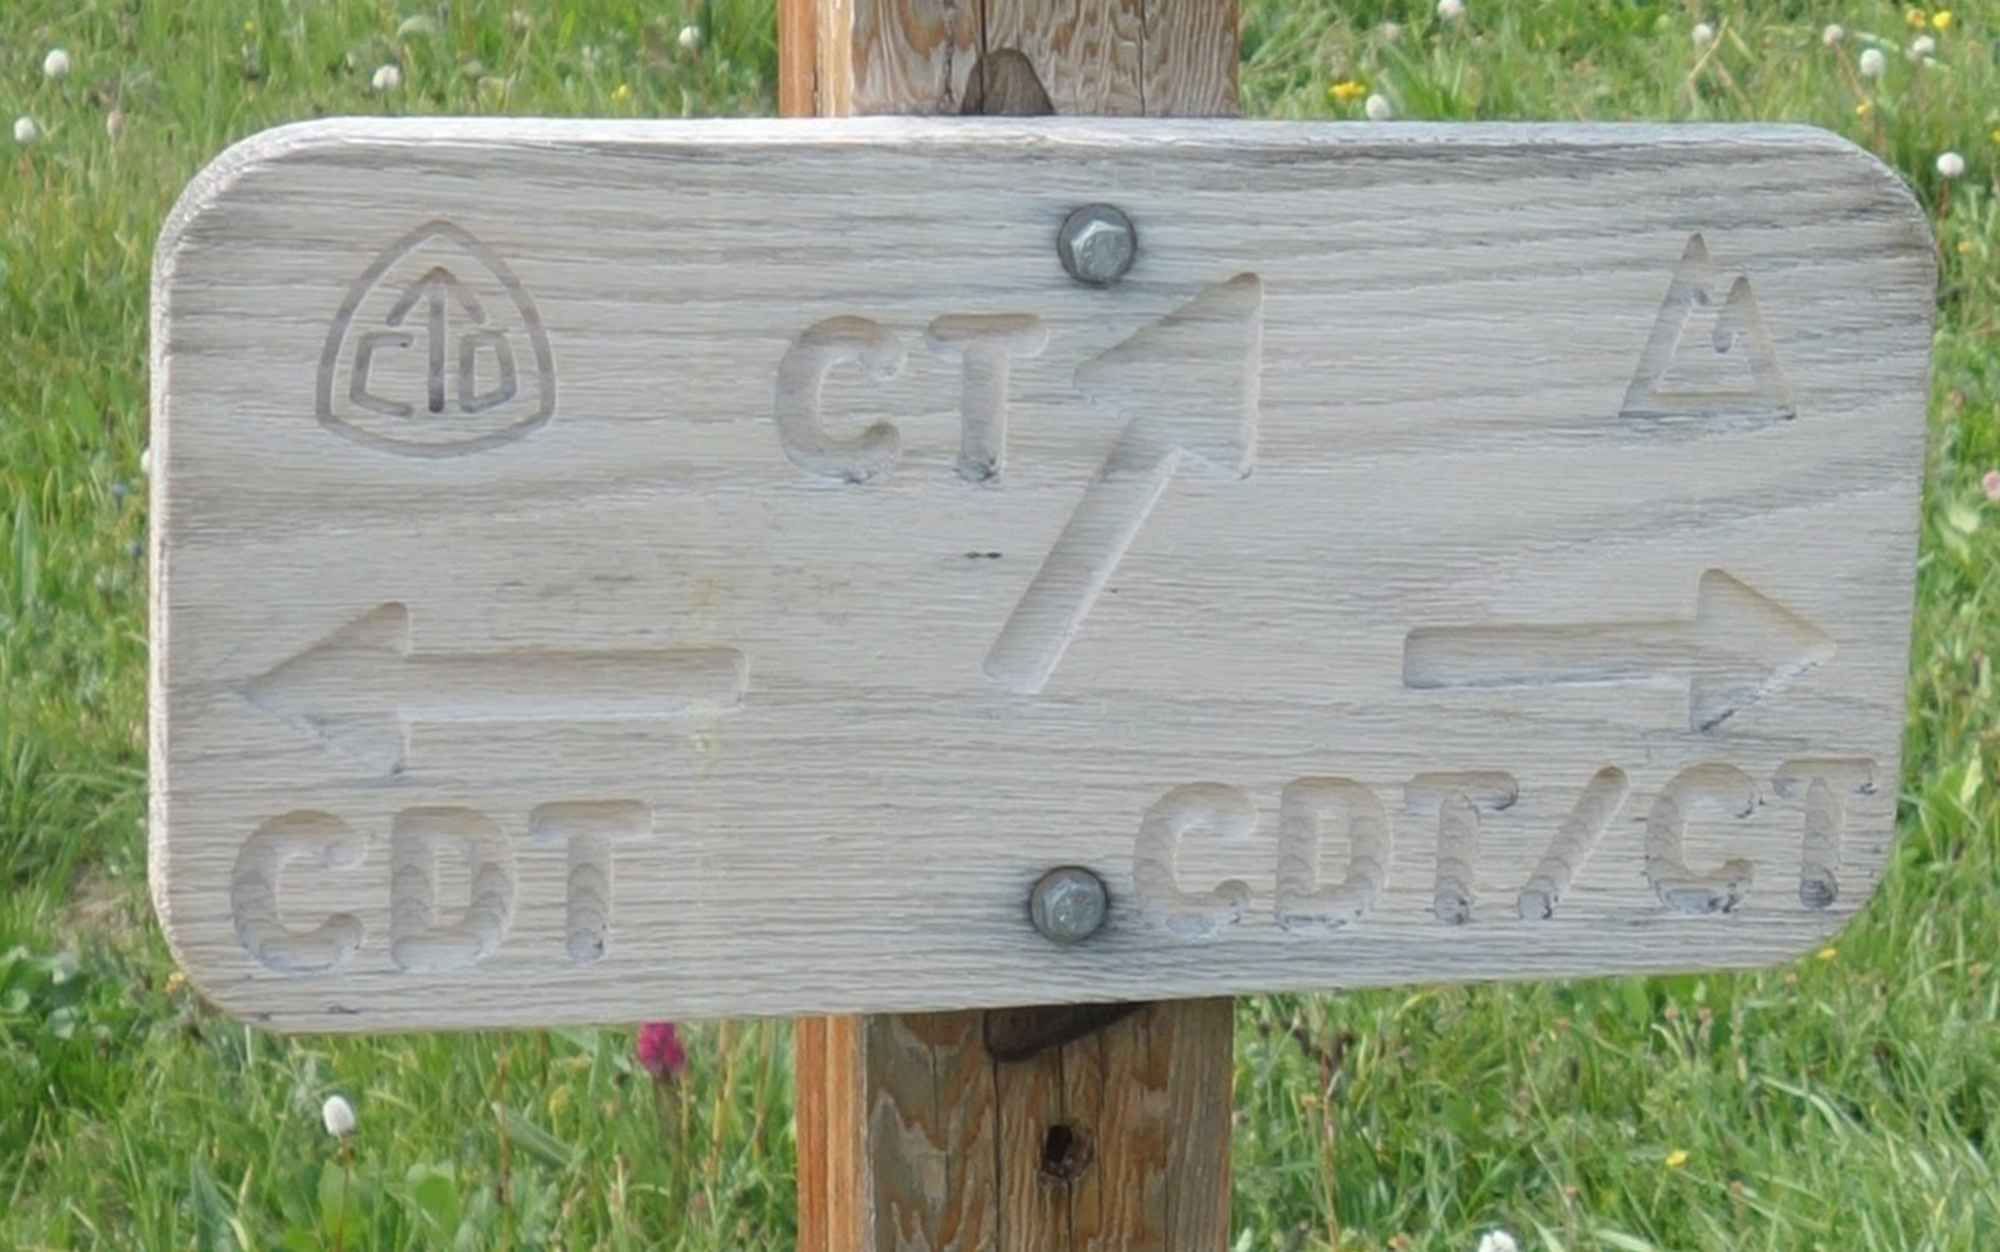 The signed intersection of the Colorado Trail (CT) and the Continental Divide Trail (CDT).